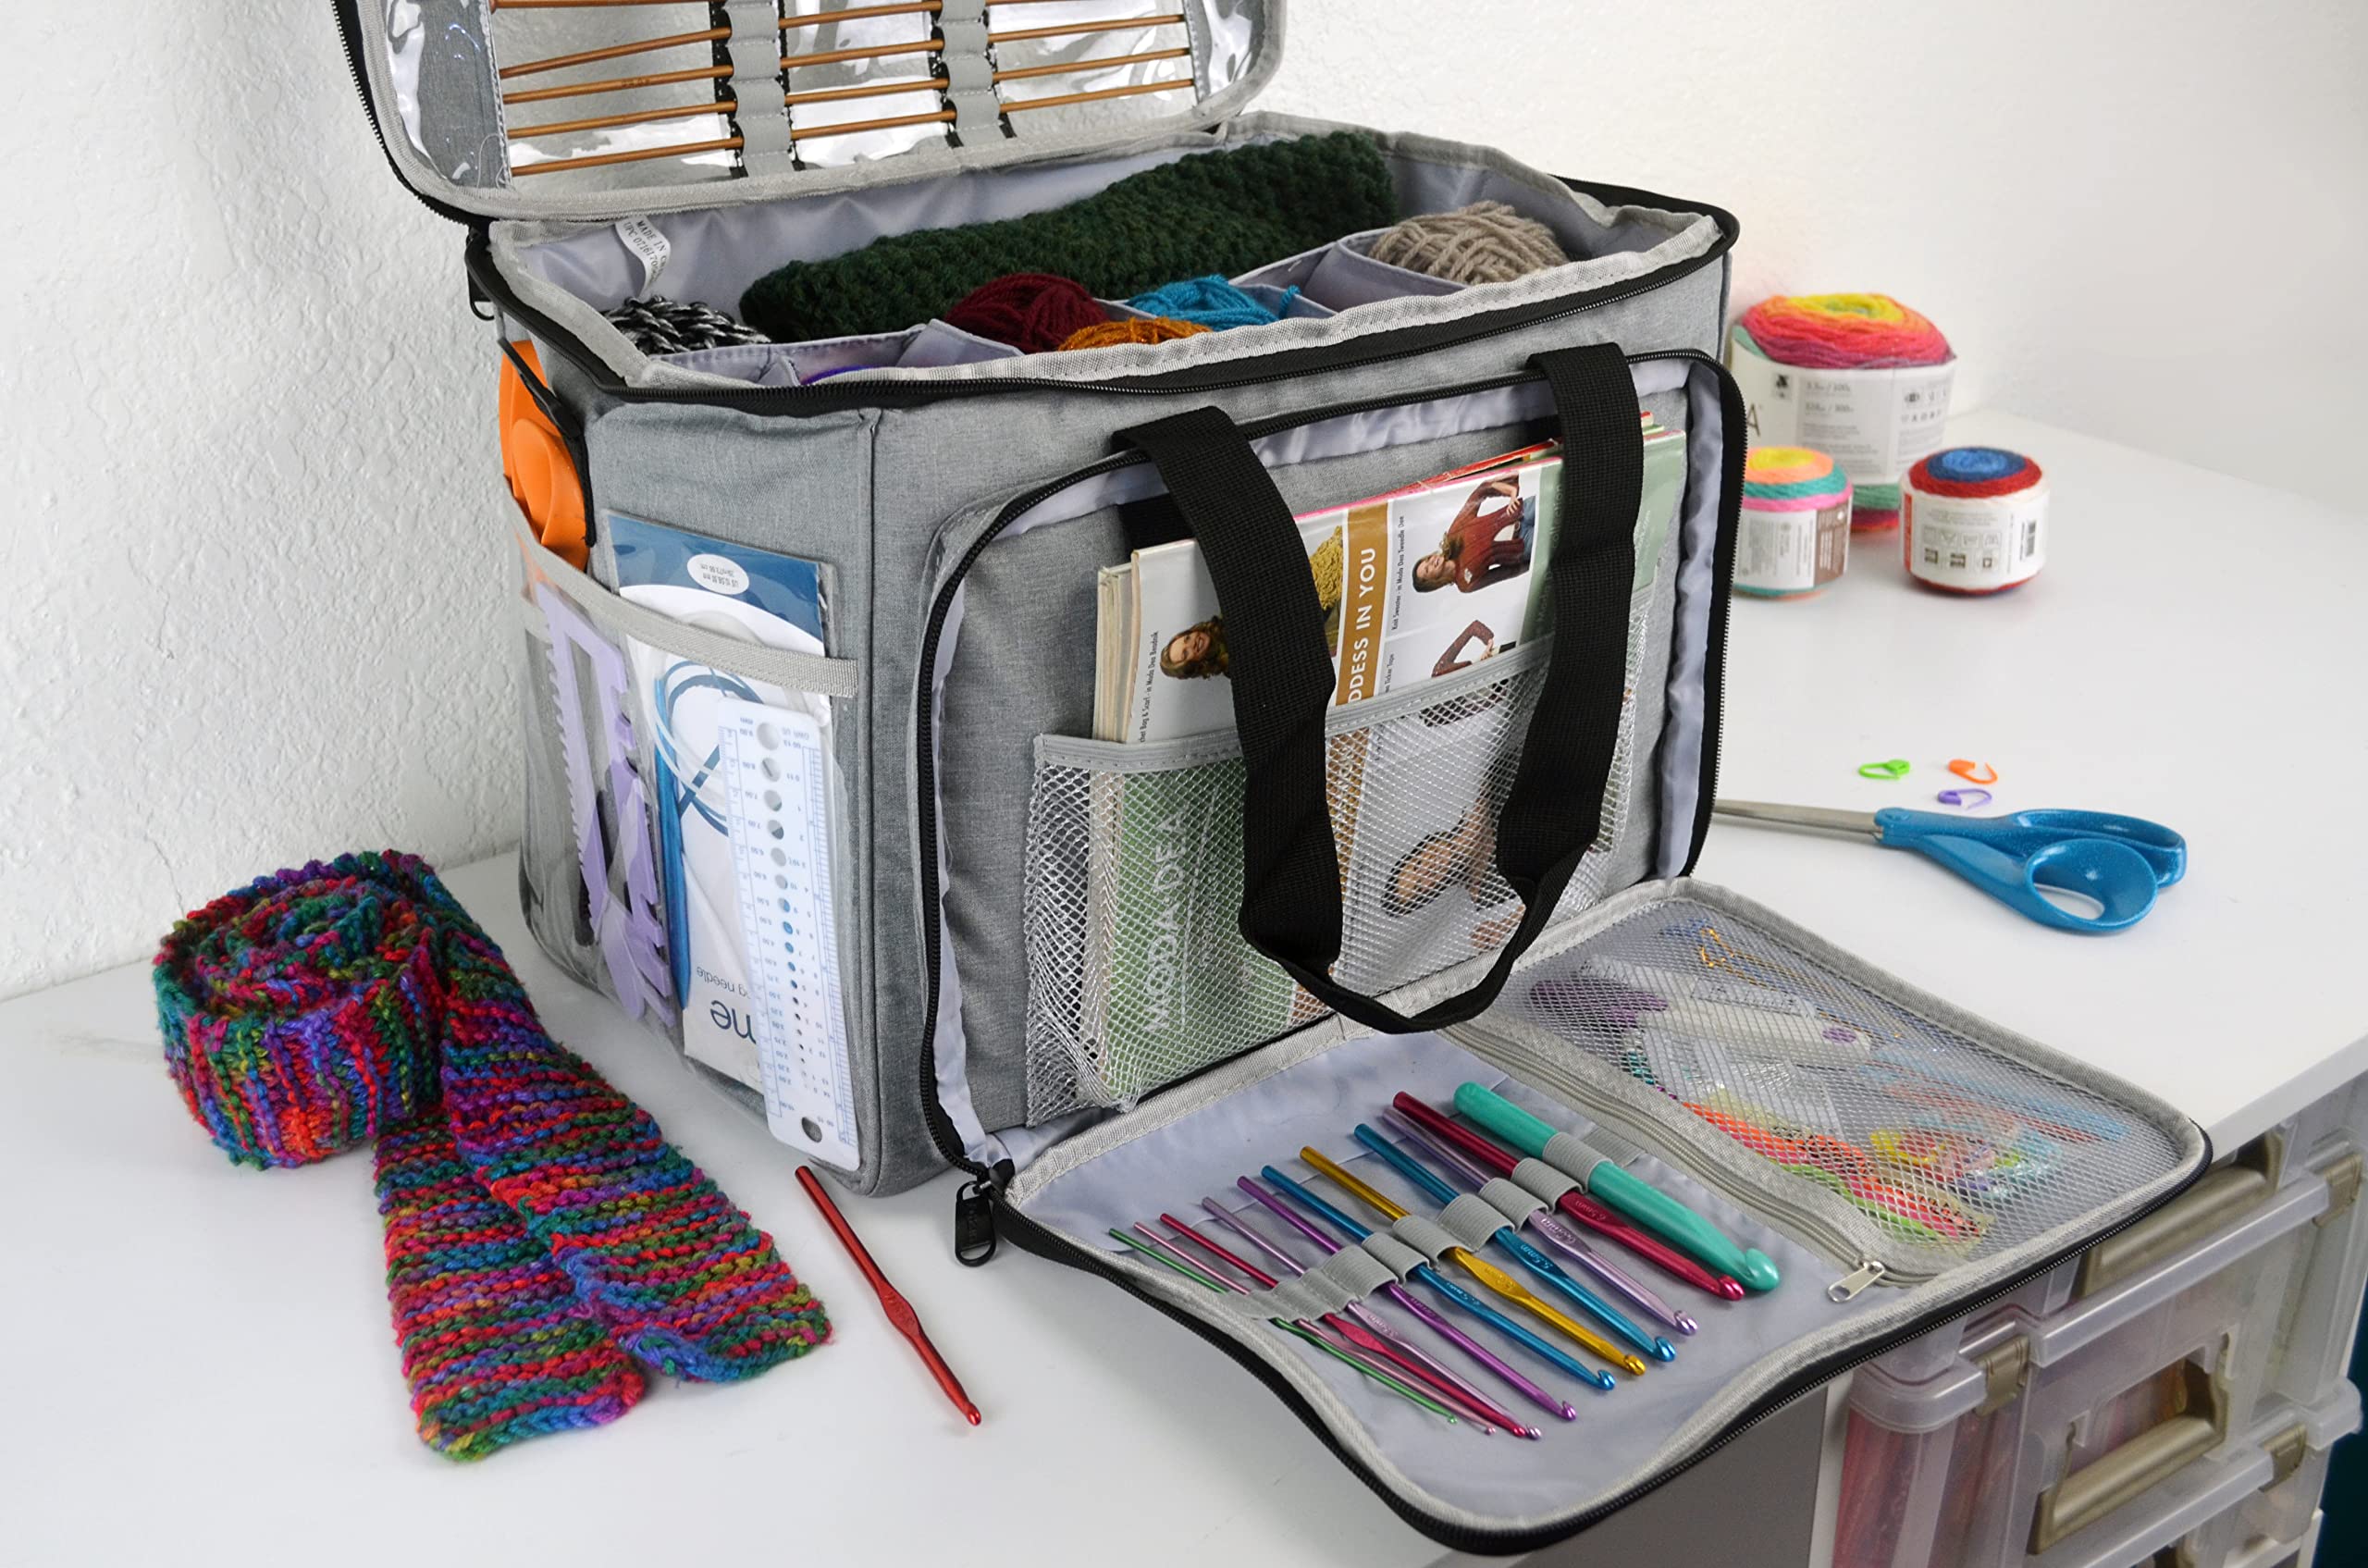 ArtBin 6938AG Needleworks Project Bag, Needleworks Project Bag with Removable Dividers, Split Main Compartment, & Pockets, Yarn & Project Storage, Grey